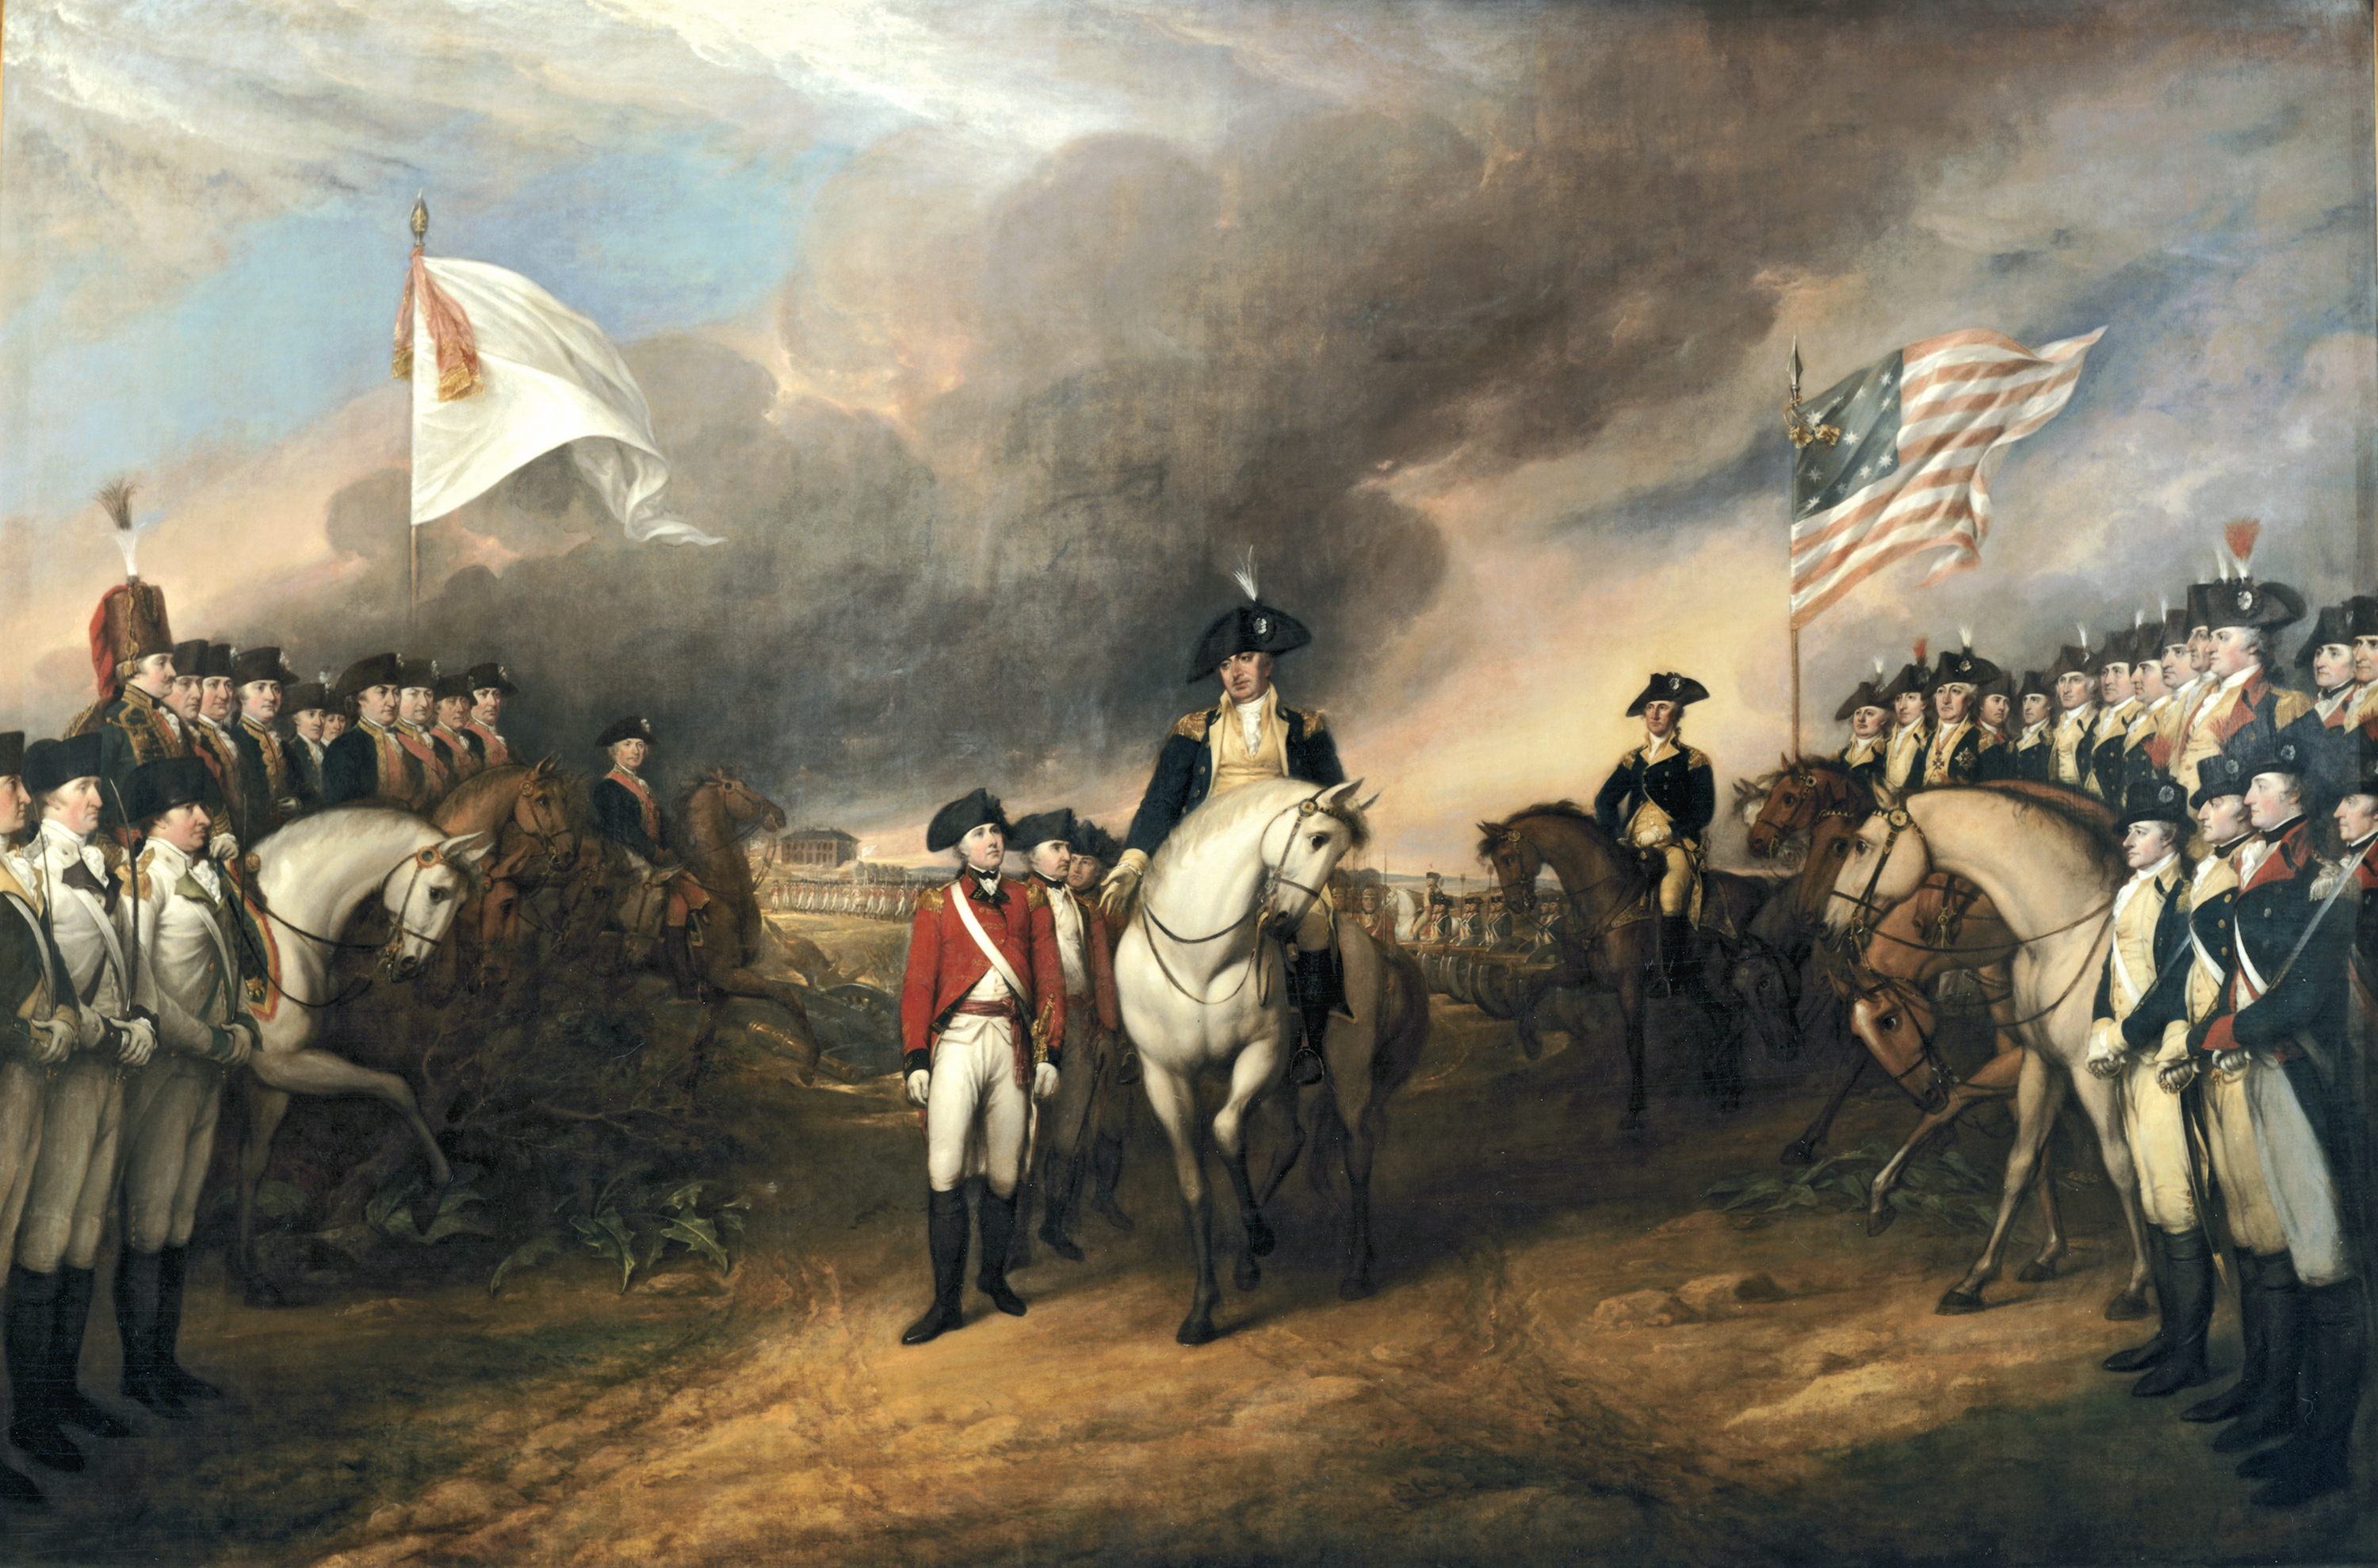 the American Revolution is seen as a power grab by white Europeans